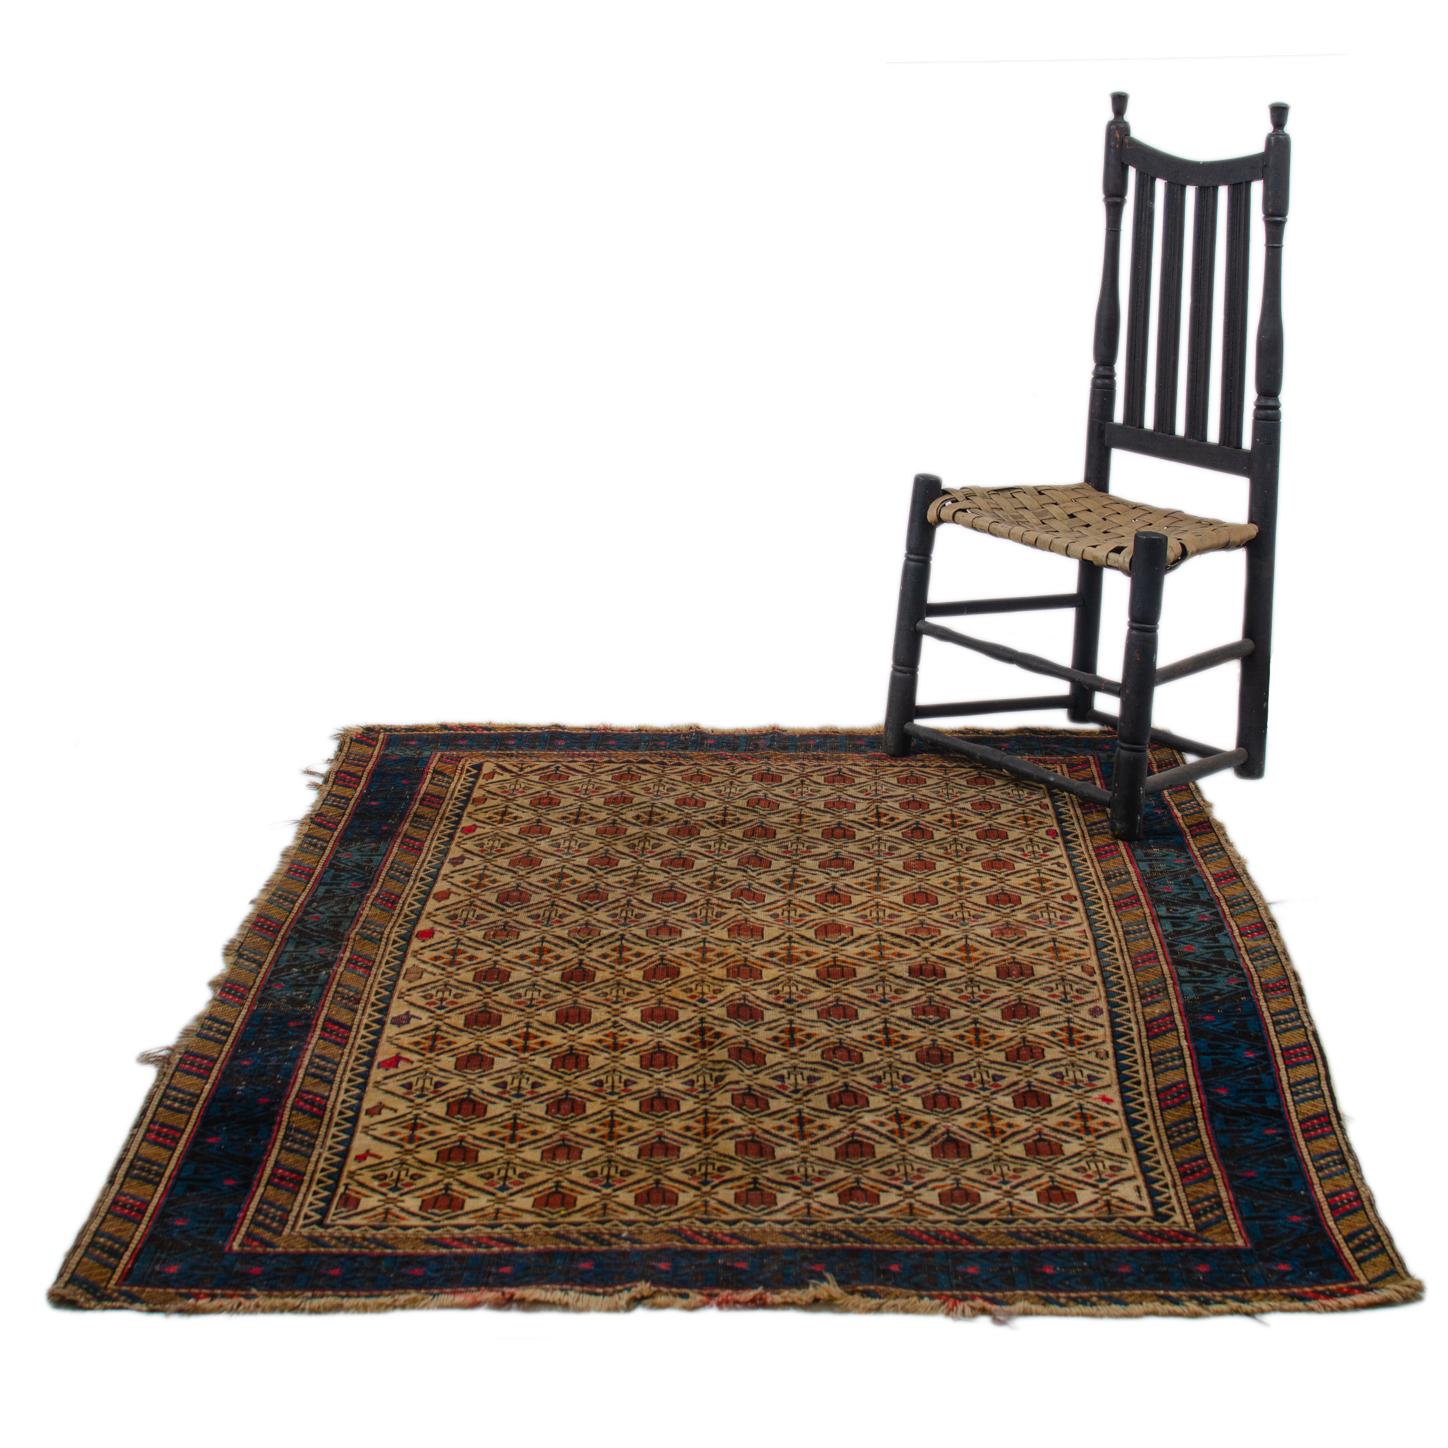 An antique Daghestan rug, circa 1900.

Repeating rows of red tulips and flowers on ivory ground.  Blue and black lattice main border within crosshatch borders.  

4’2” by 5’5” (50 by 65 inches)

